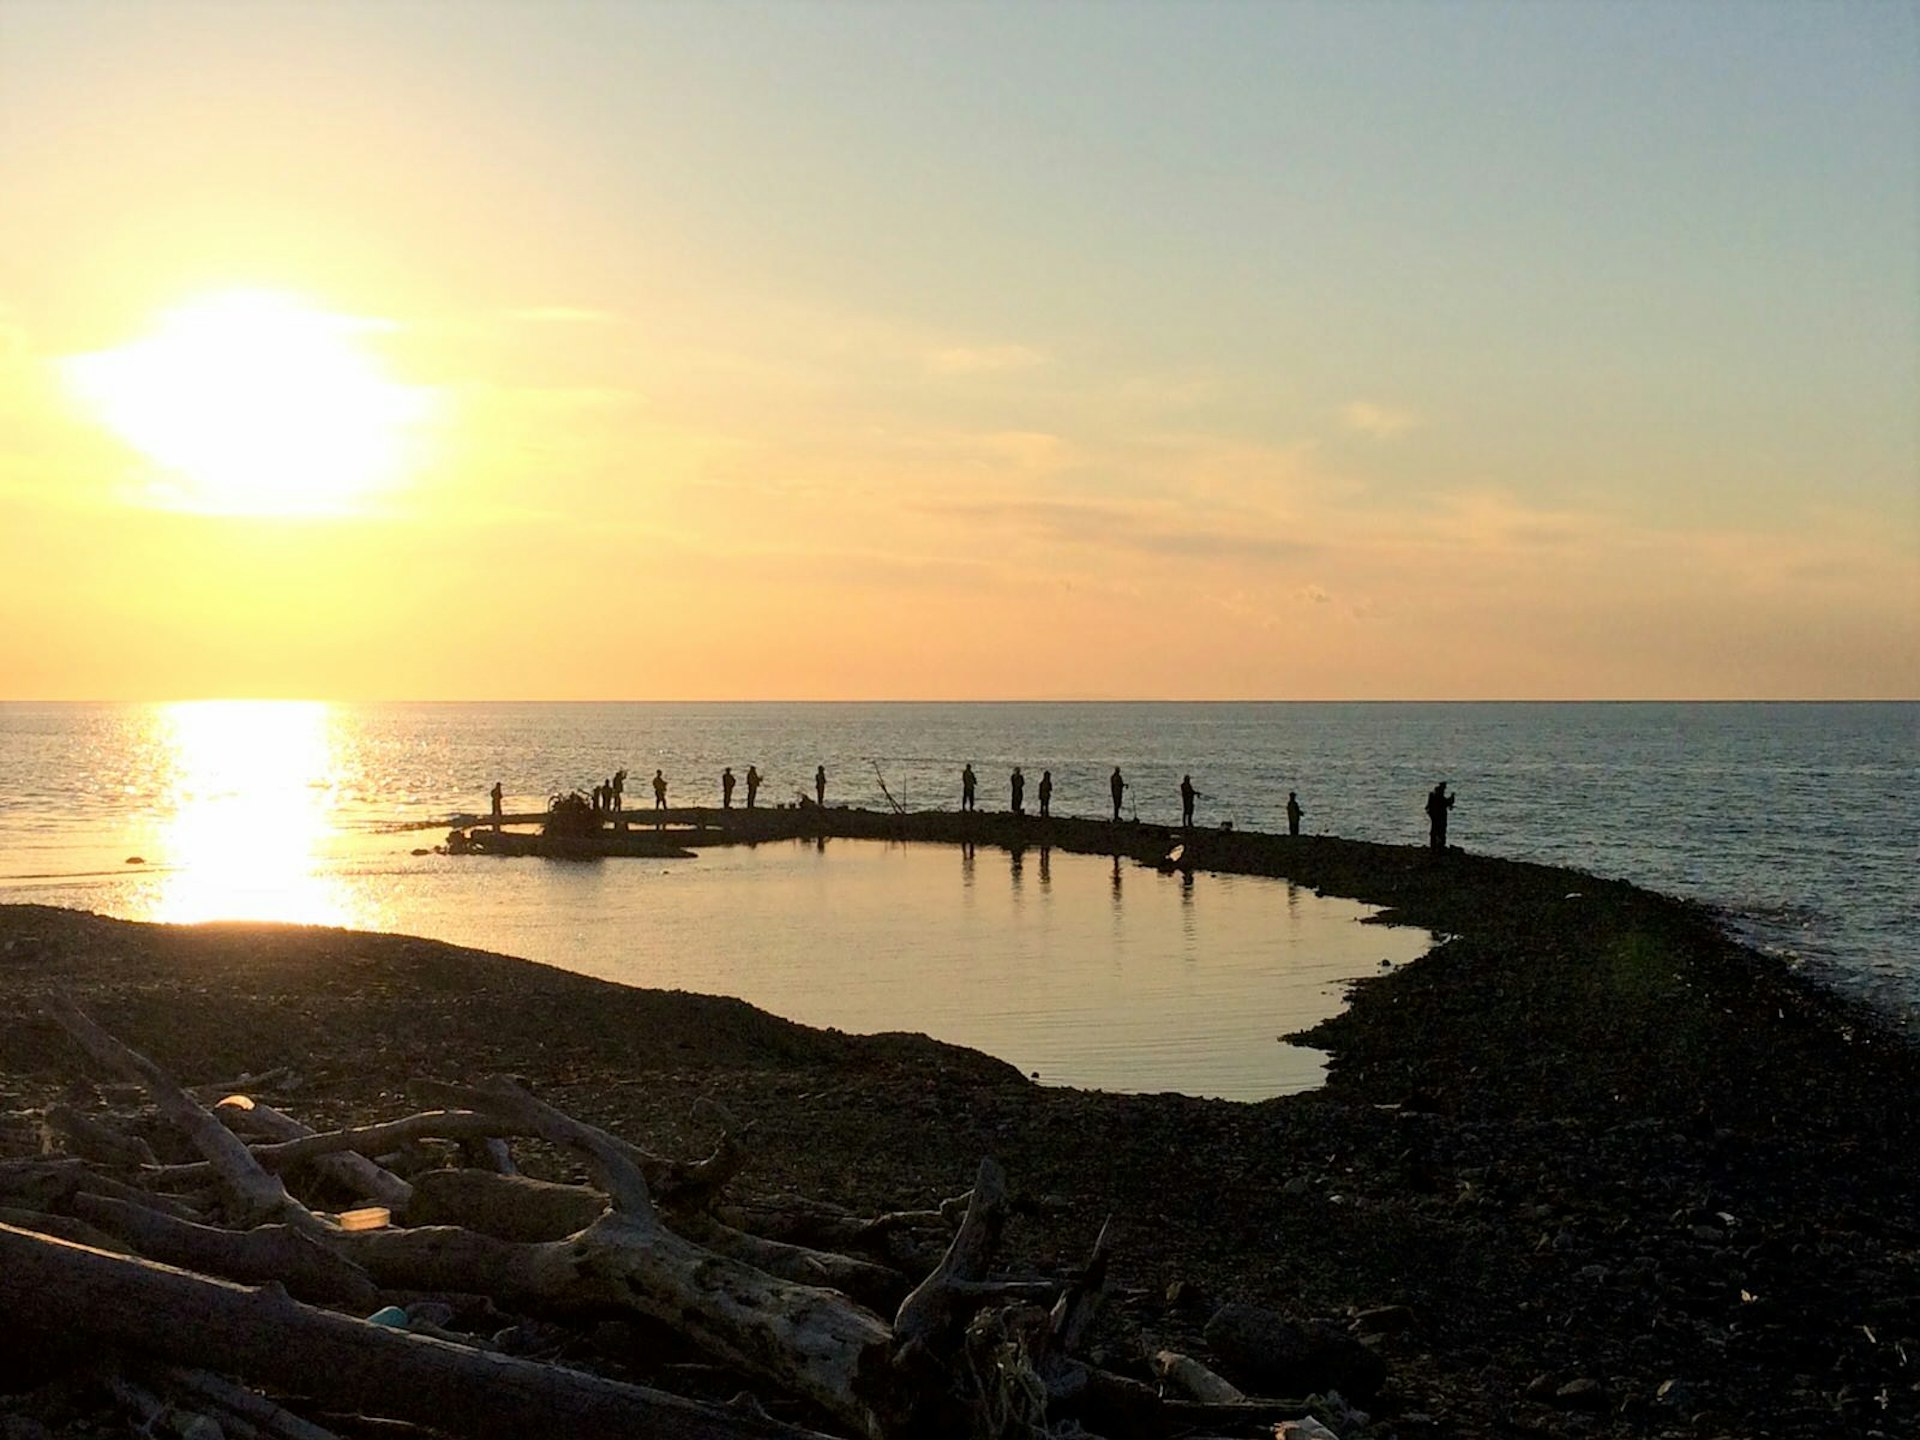 A dozen people stand on a small rocky outcrop fishing as the sun sets over the sea